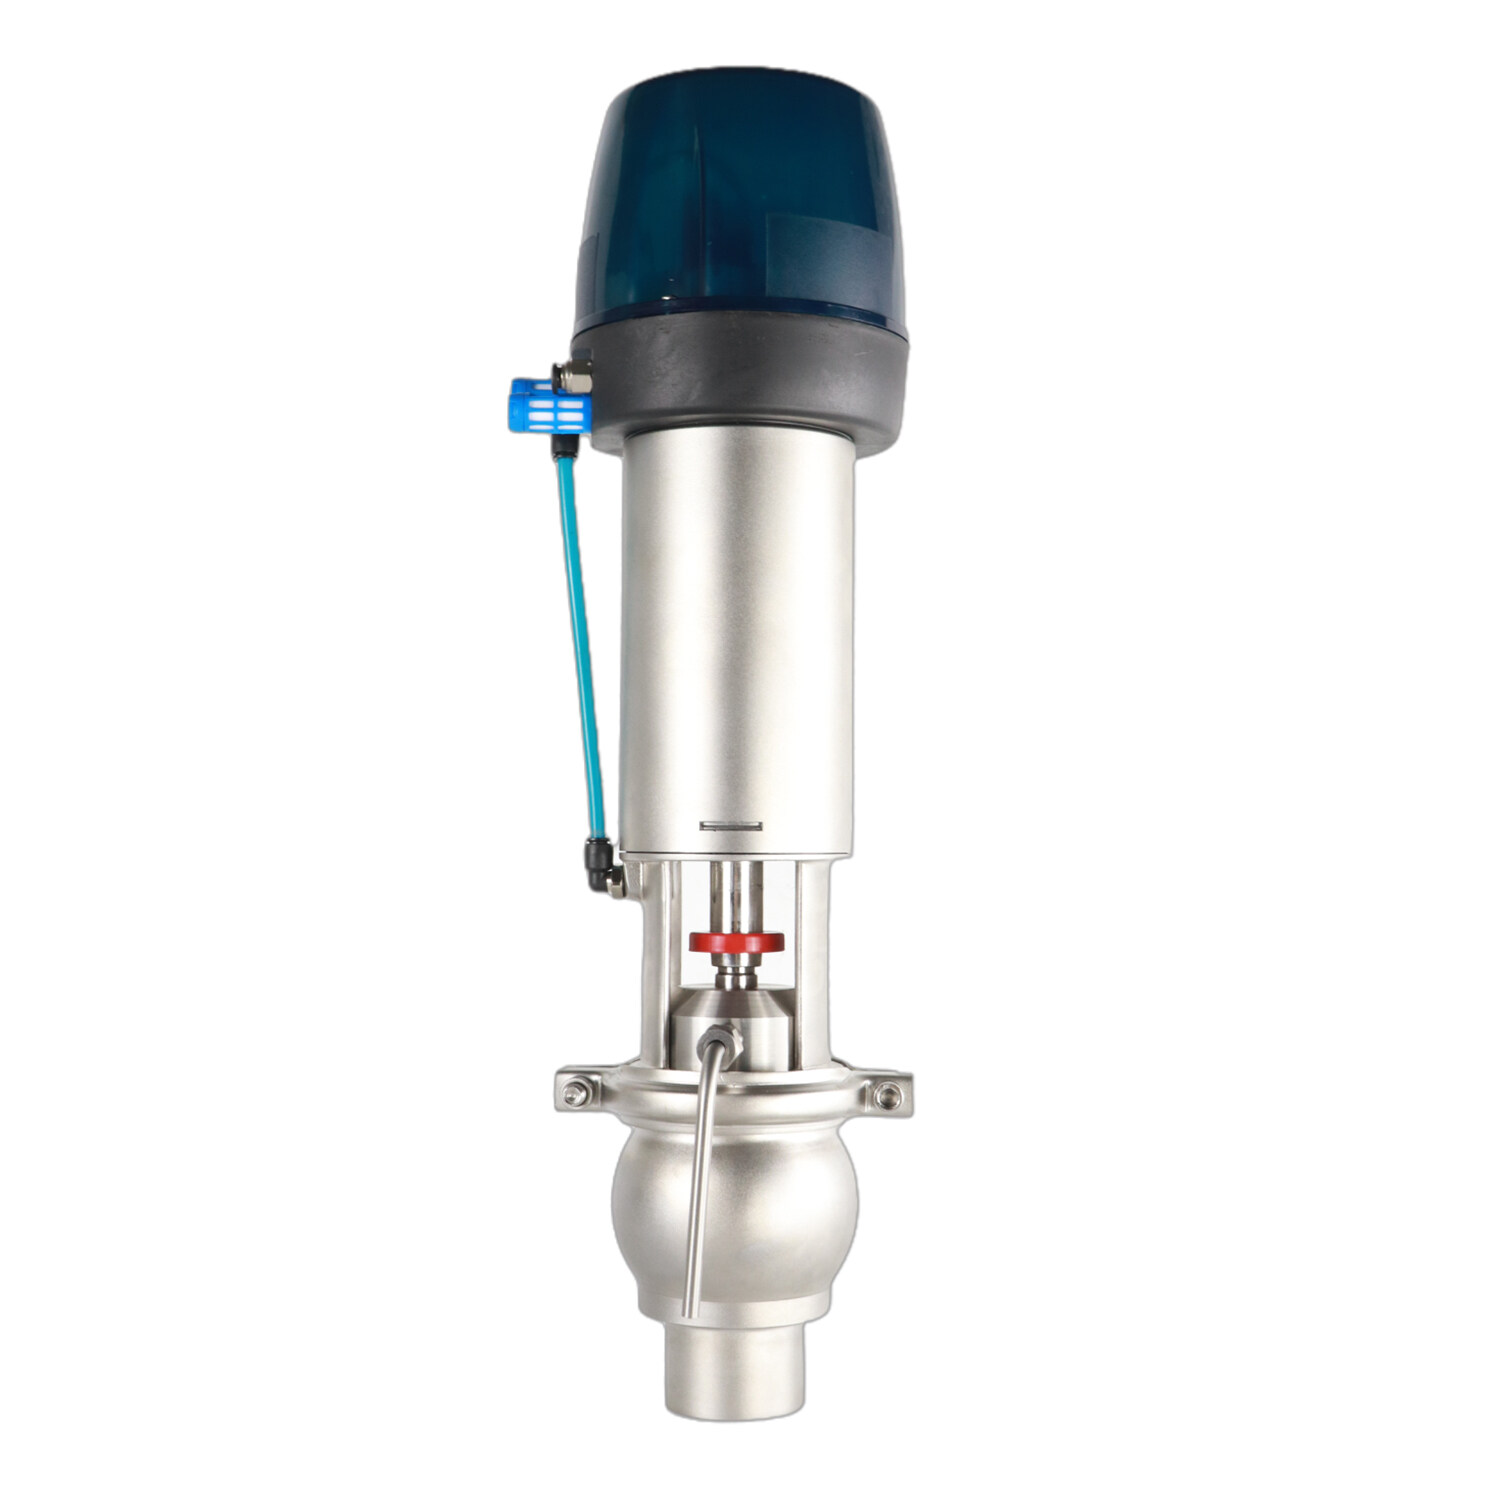 Aseptic Shut Off Valves, Aseptic Cut Off Valves, Aseptic Pneumatic Flow Division Valves